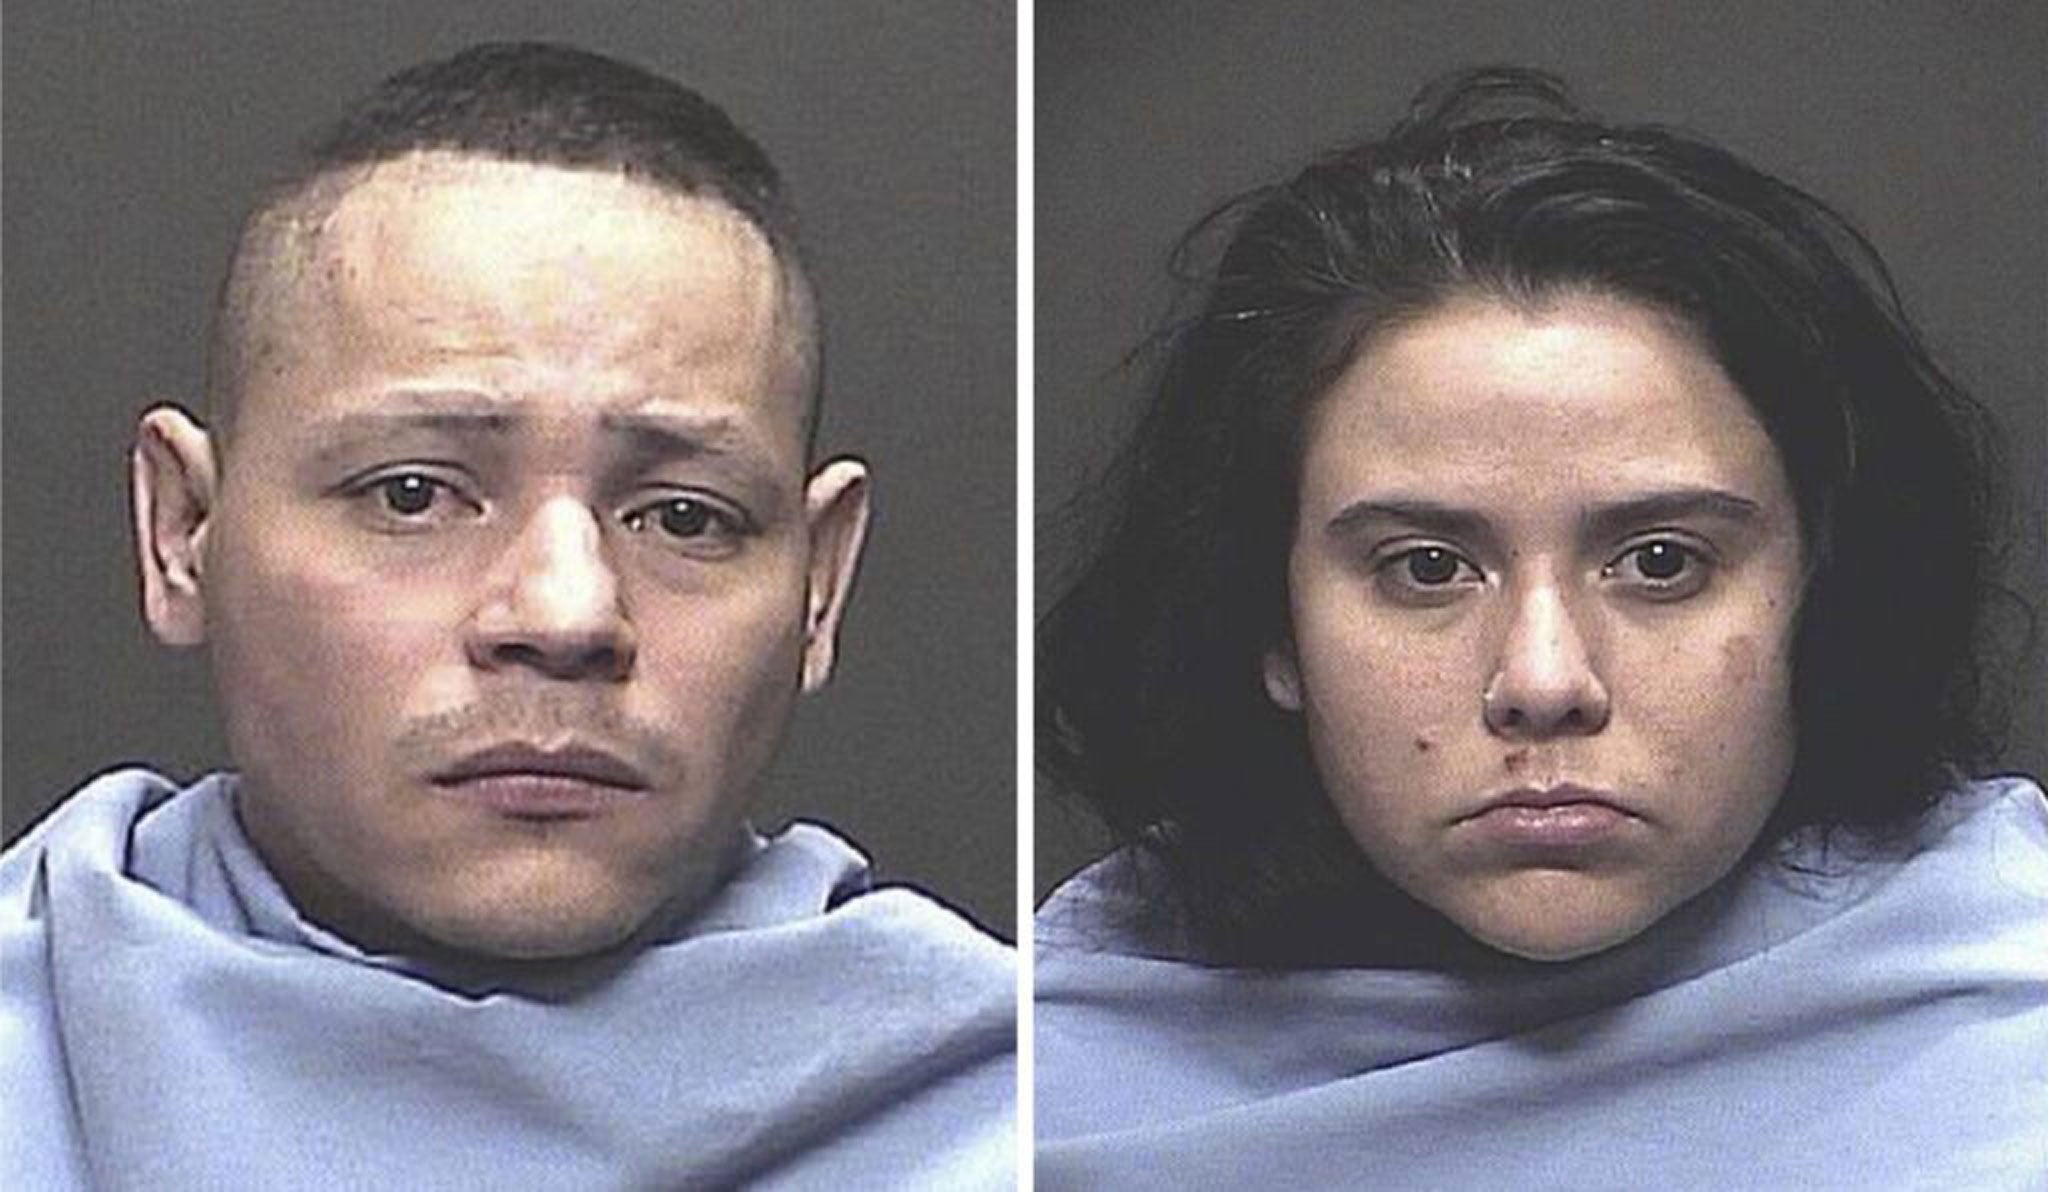 Photographs provided by the Tucson Police Department show Fernando Richter and his wife Sophia Richter who have been charged with the imprisonment of her three daughters in Tucson, Arizona